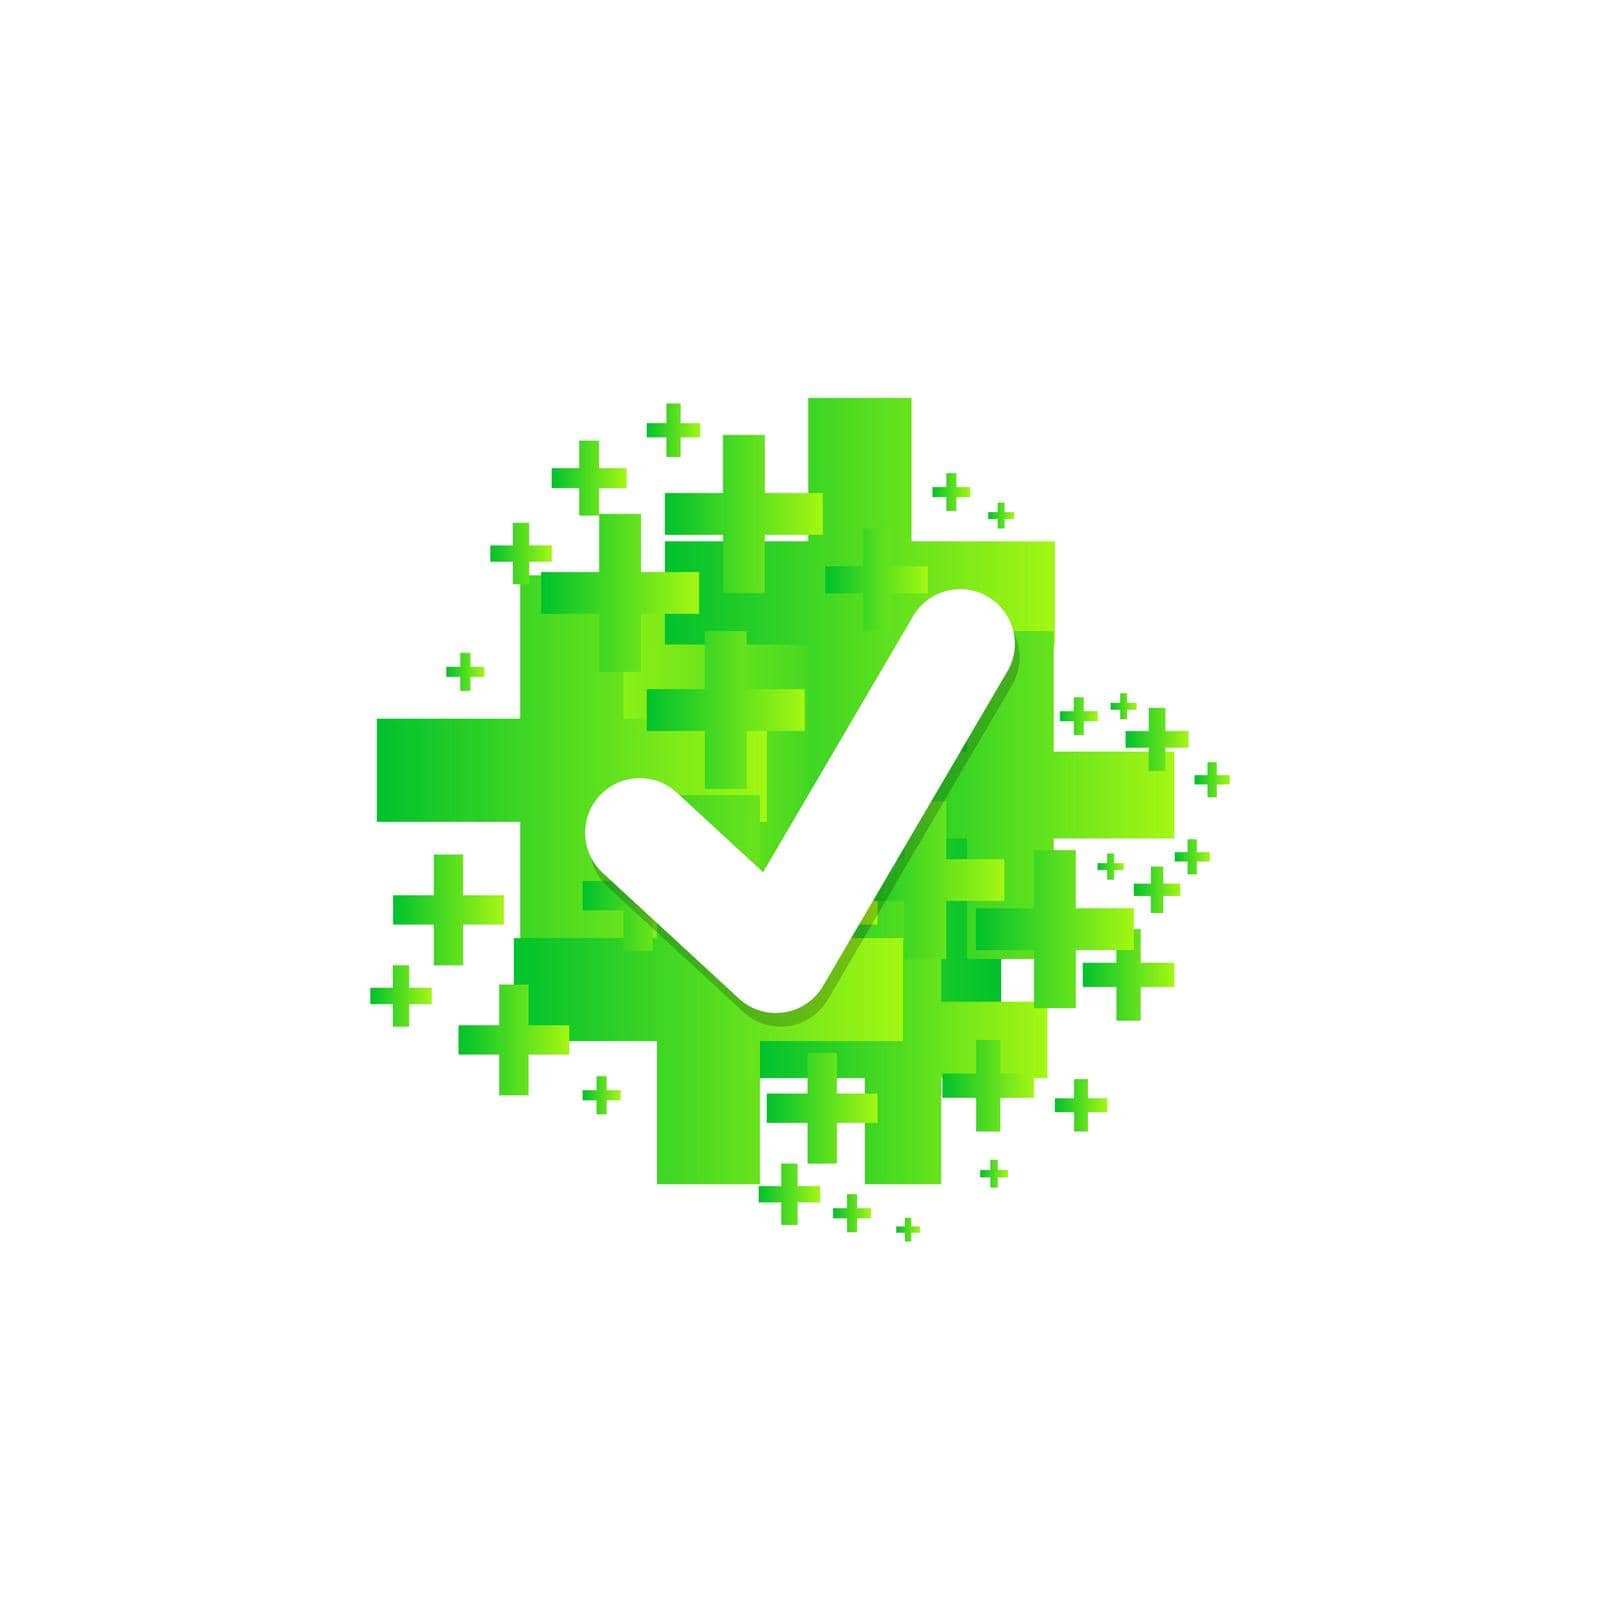 Checkmark green icon. Approved simbol with green pros. Vector illustration EPS10 by TopRated